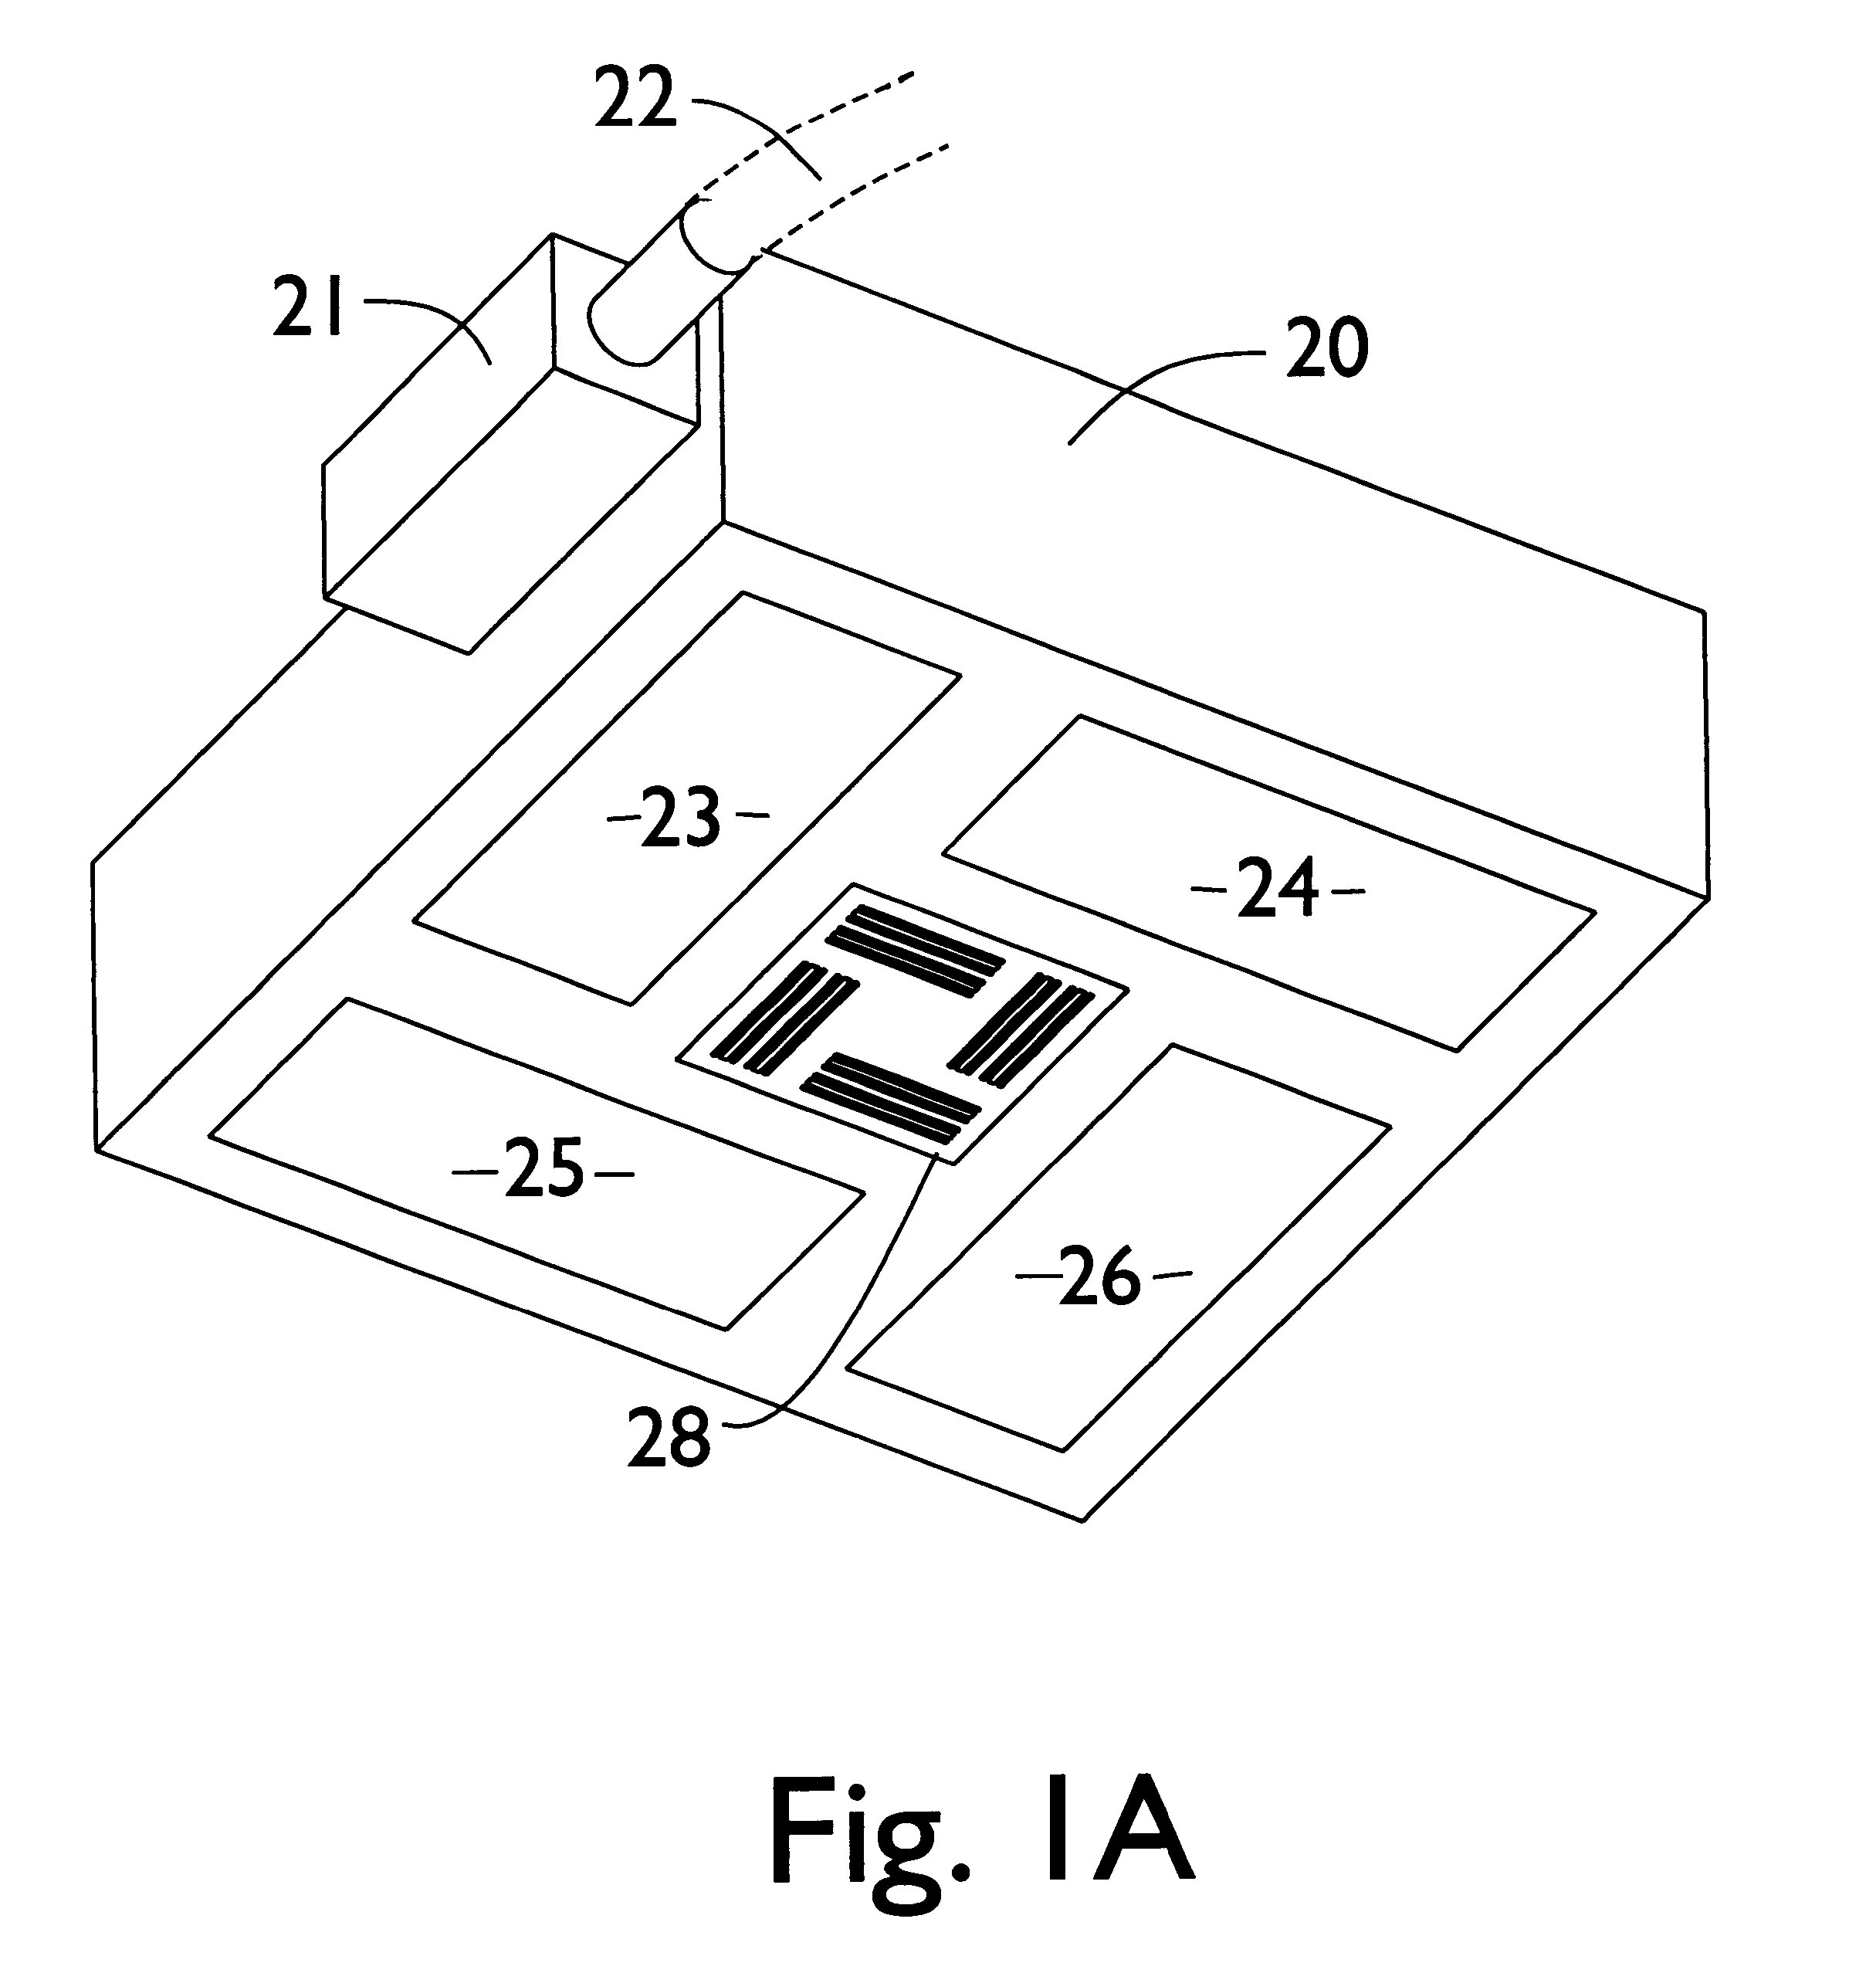 Closed-loop planar linear motor with integral monolithic three-degree-of-freedom AC-magnetic position/orientation sensor